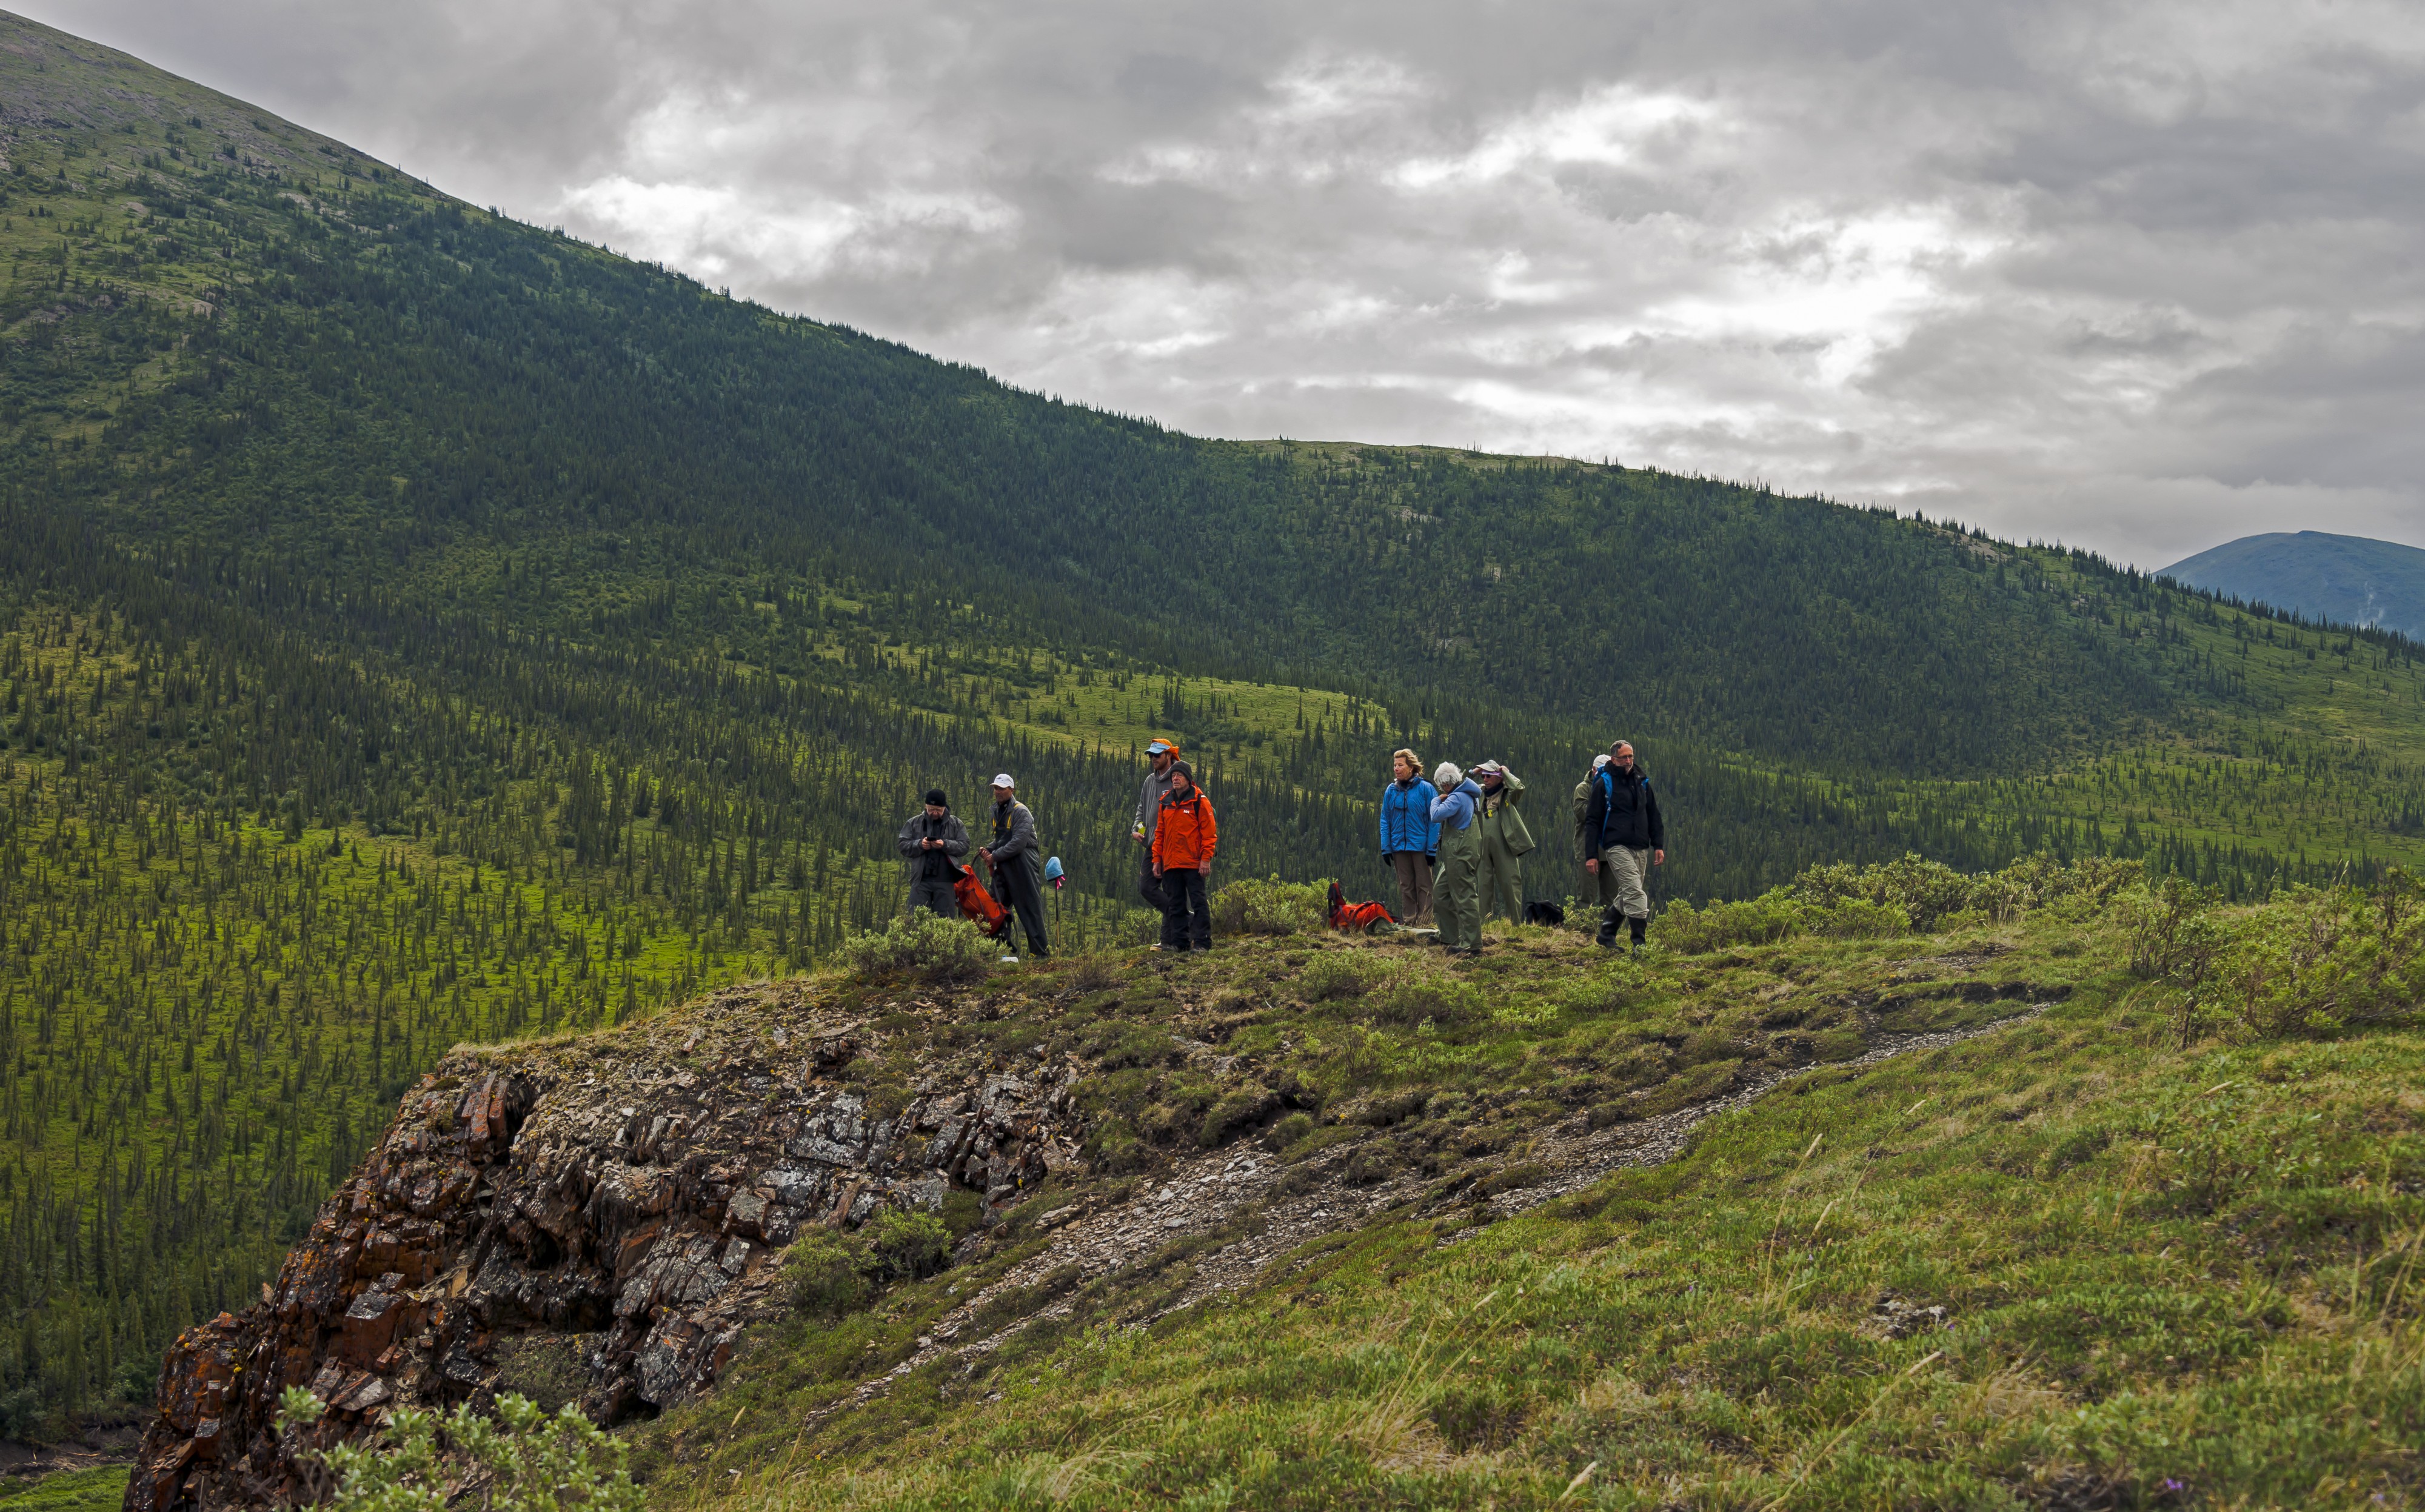 Hikers overlooking confluence of Firth River and Joe Creek, Ivvavik National Park, YT